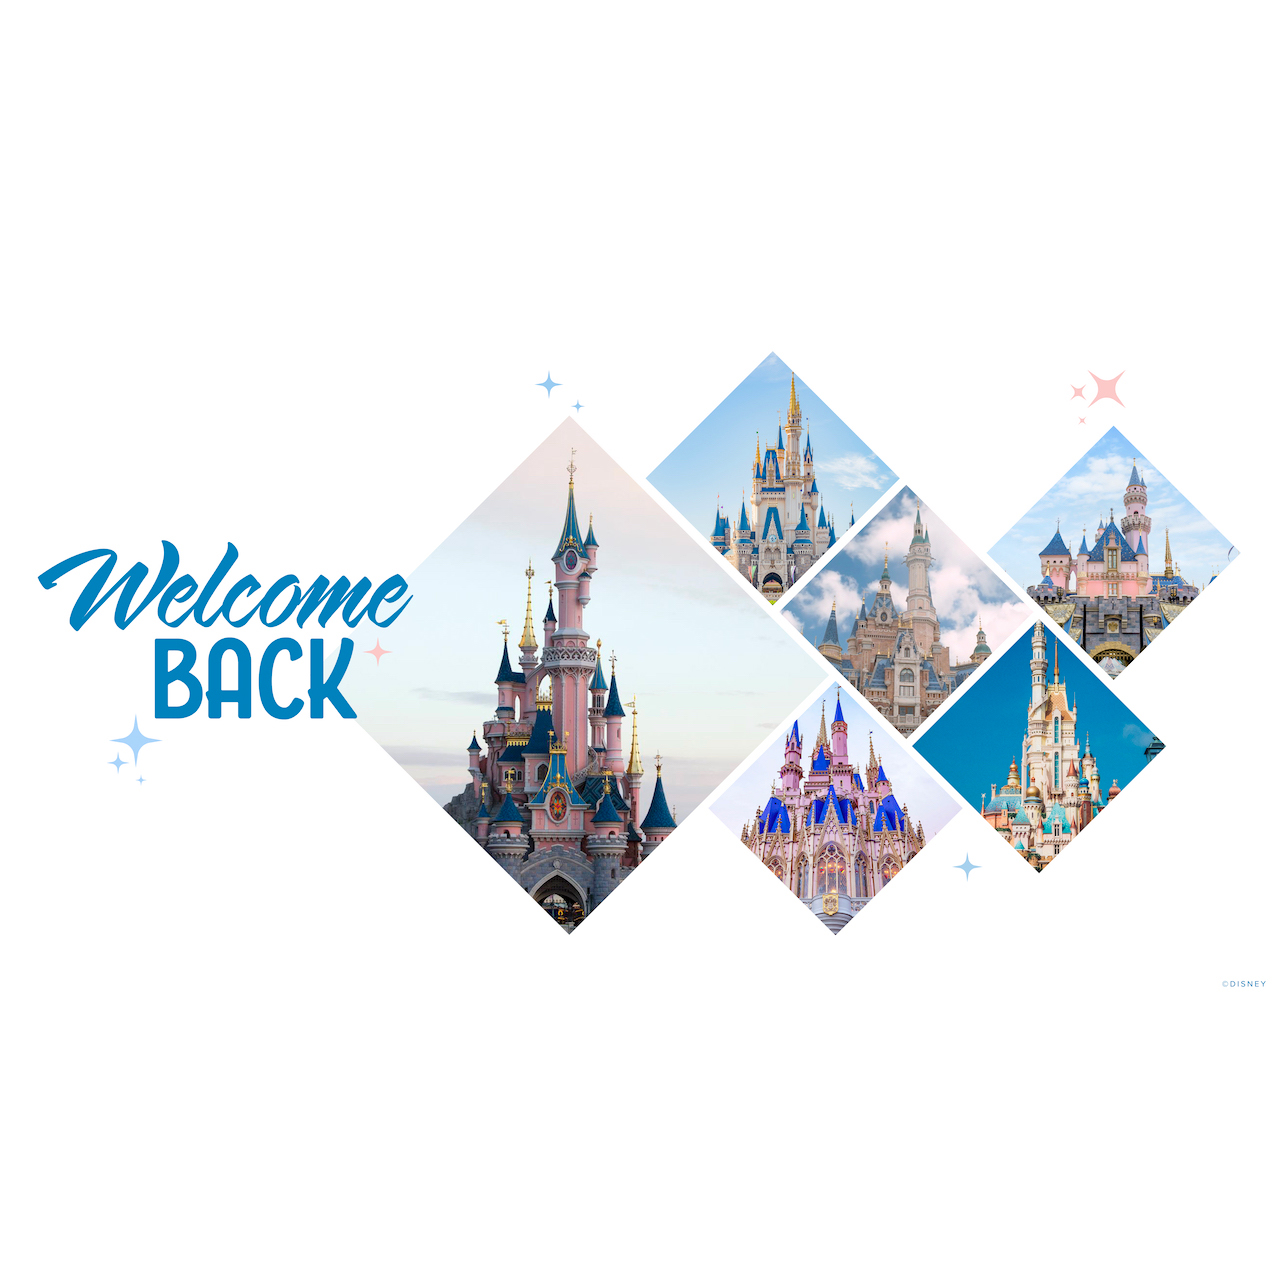 All Disney Parks World-wide Are Now Open